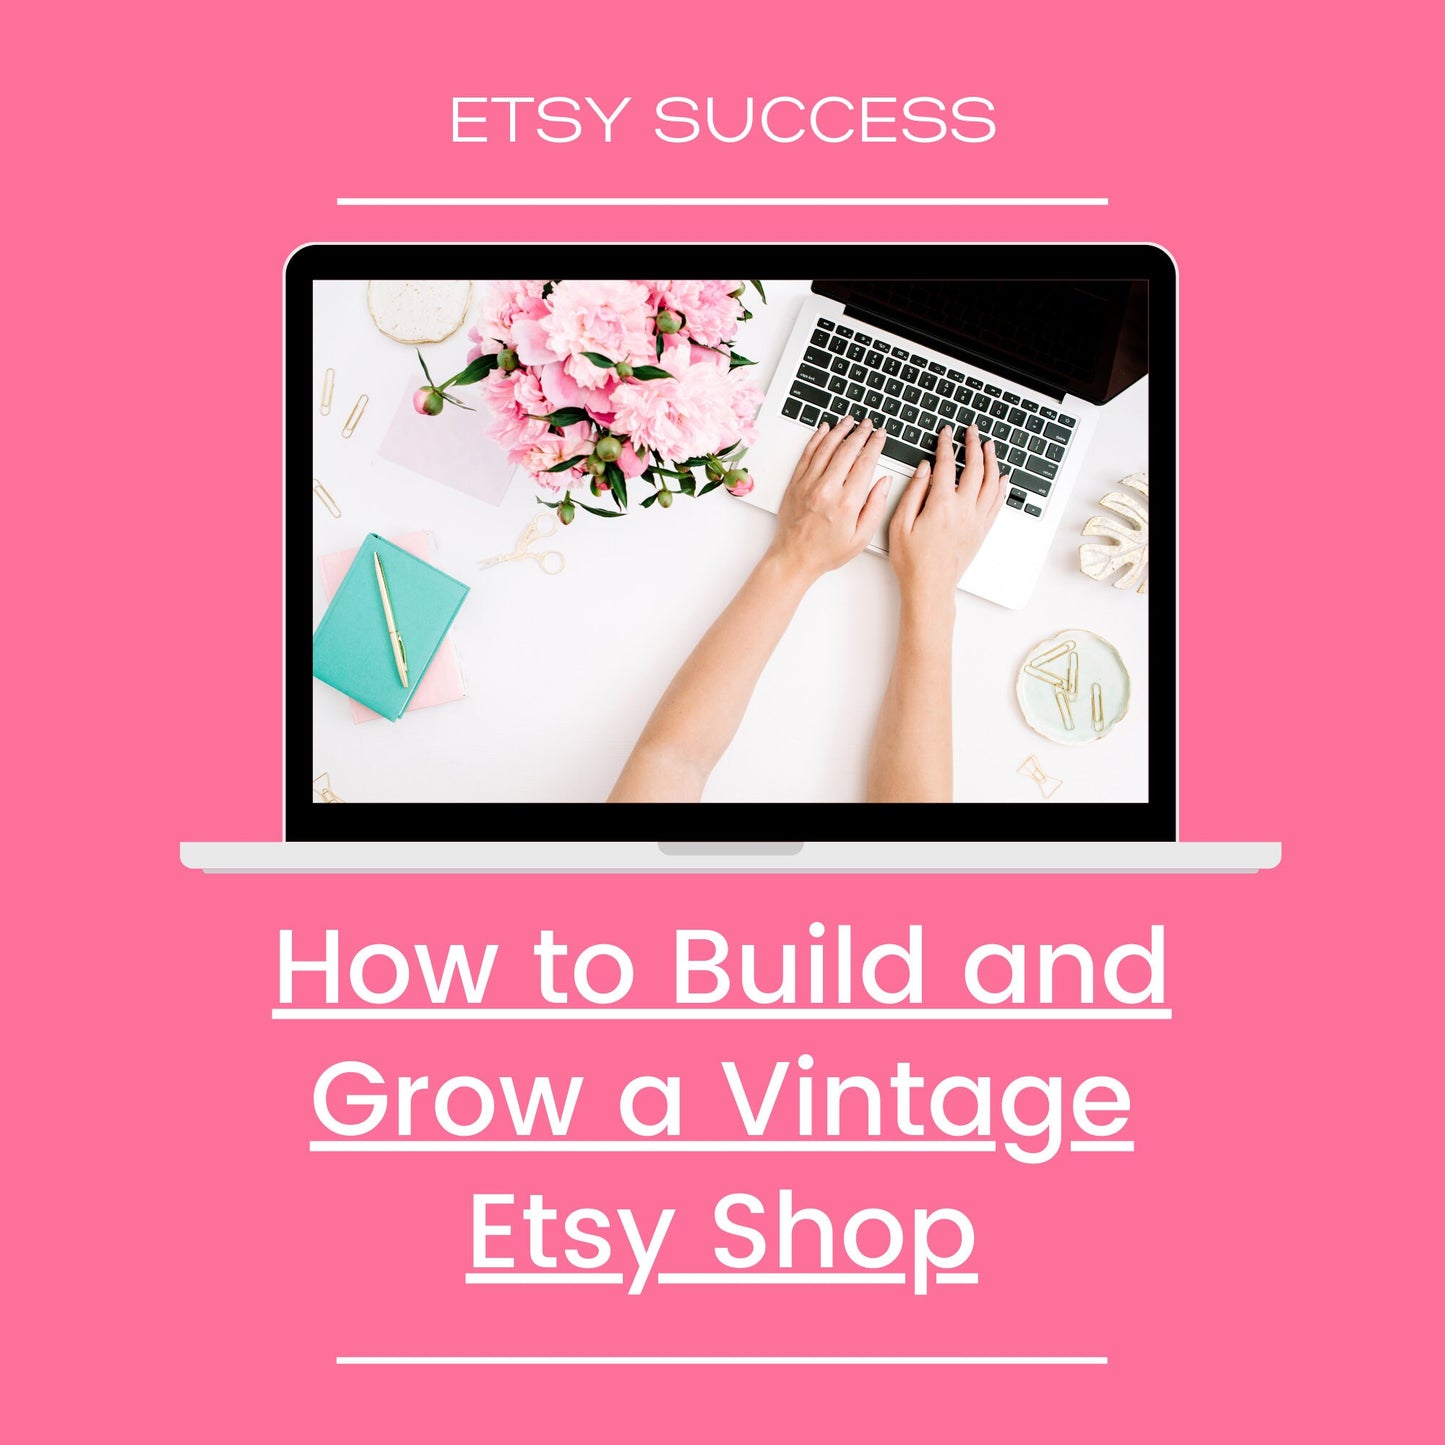 How To Build and Grow a Thriving Vintage Etsy Shop - 42 Page Ebook - Instant Download - How To Sell Vintage on Etsy